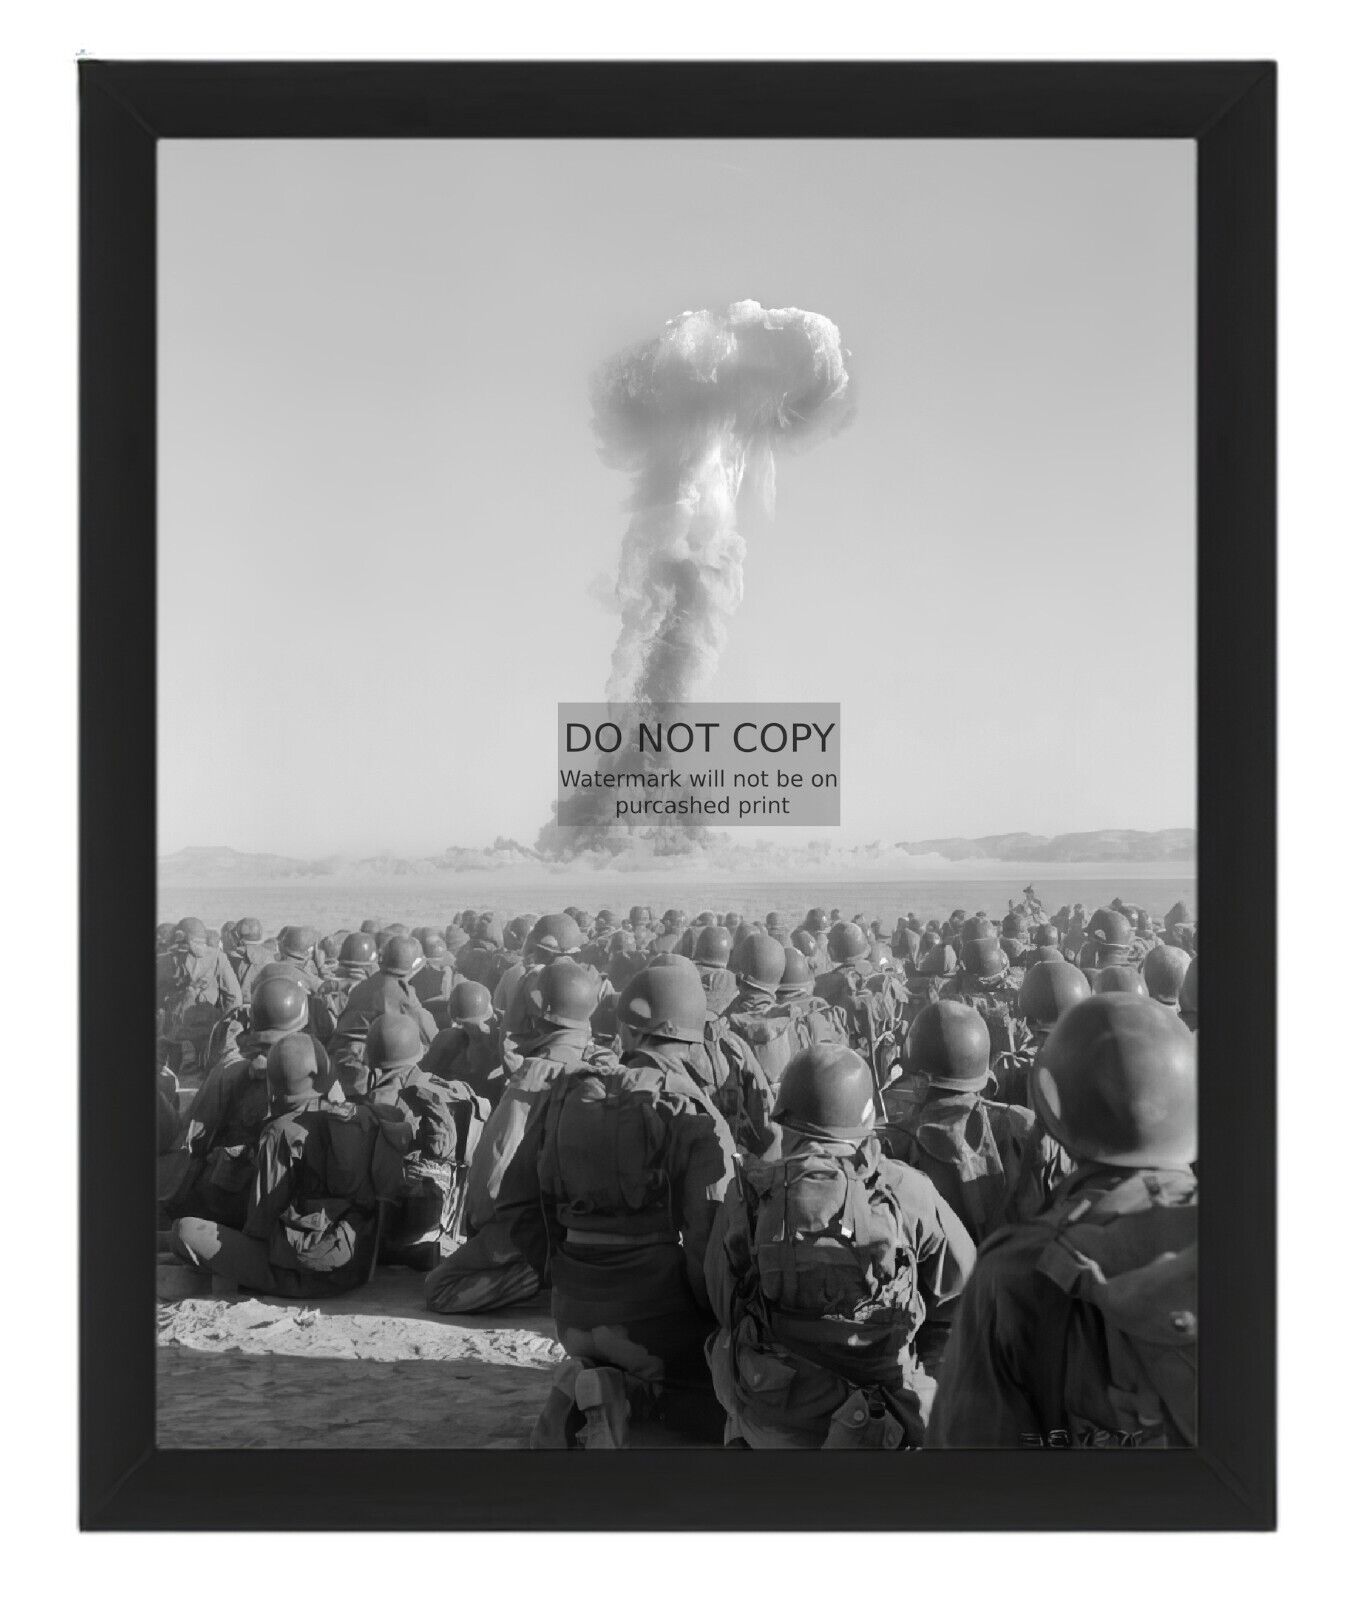 US SOLDIERS SUBJECTED TO ATOMIC BOMB NEST MUSHROOM CLOUD 8X10 FRAMED PHOTO